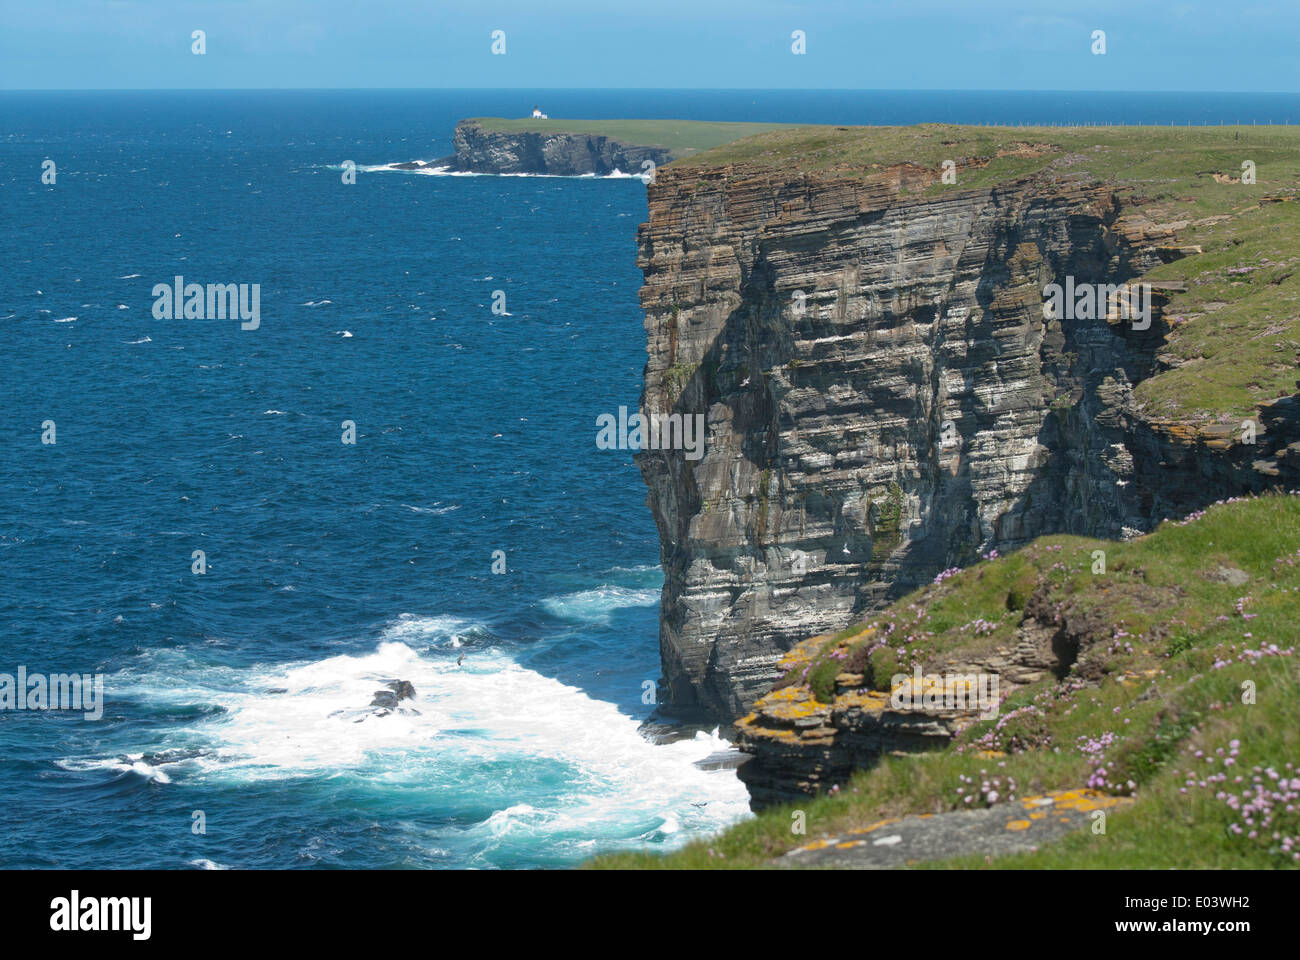 Marwick Head, RSPB wildlife reserve, mainland, Orkney, Scotland. The cliffs are home to many nesting seabirds. Stock Photo